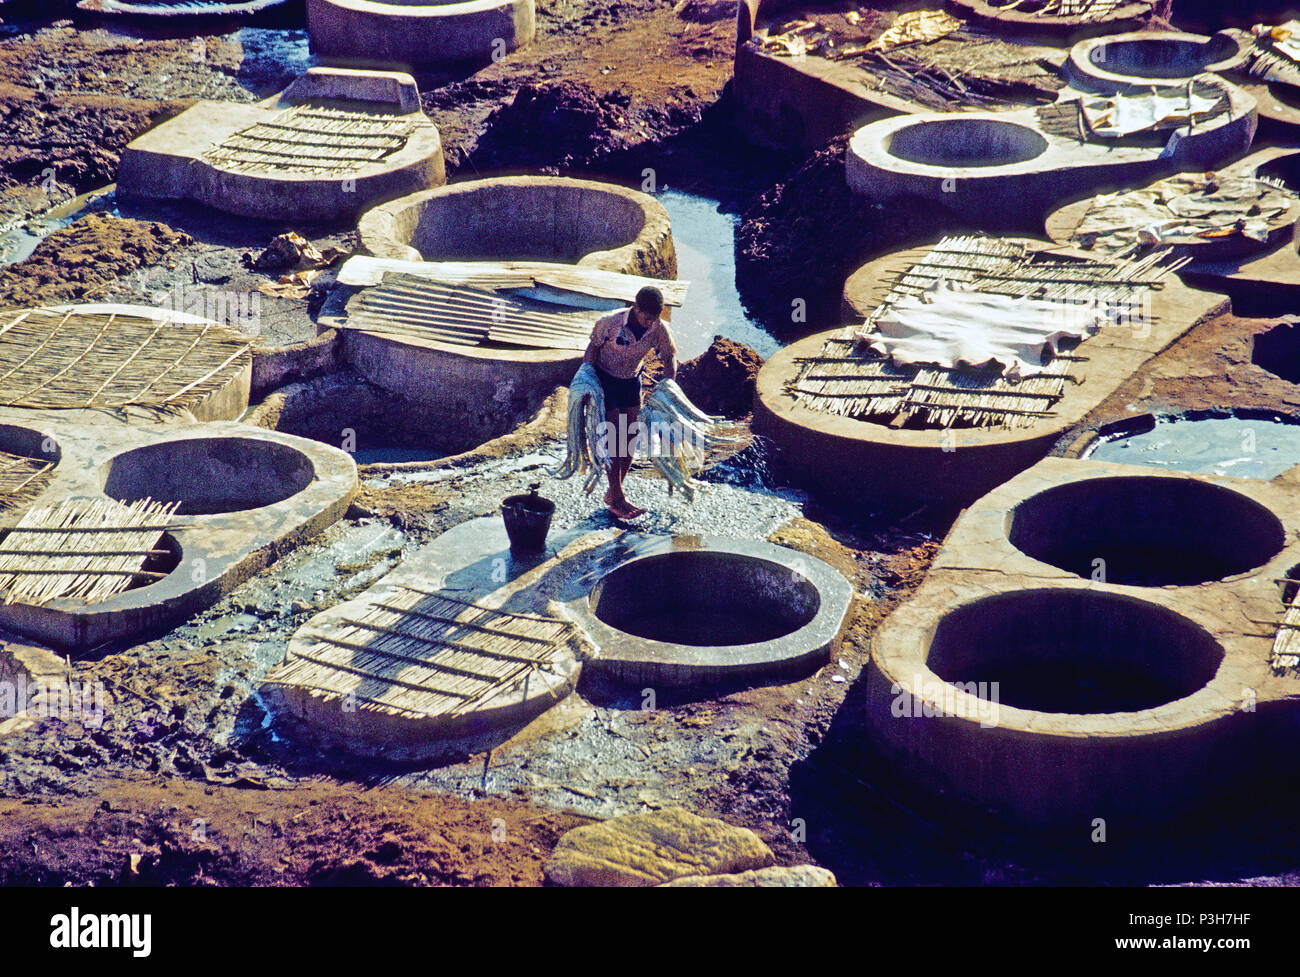 One worker carries animal hides from one tannery vat in the next. In the old town of Fes, visitors can take a look at the work in leather tanneries. For centuries, animal hides with bird dung stain and natural alkalis have been processed into finished leather in traditional way in pits in the ground and clay basins, analogue undated image from March 1985. Photo: Matthias Toedt/dpa-Zentralbild/ZB/Picture Alliance | usage worldwide Stock Photo